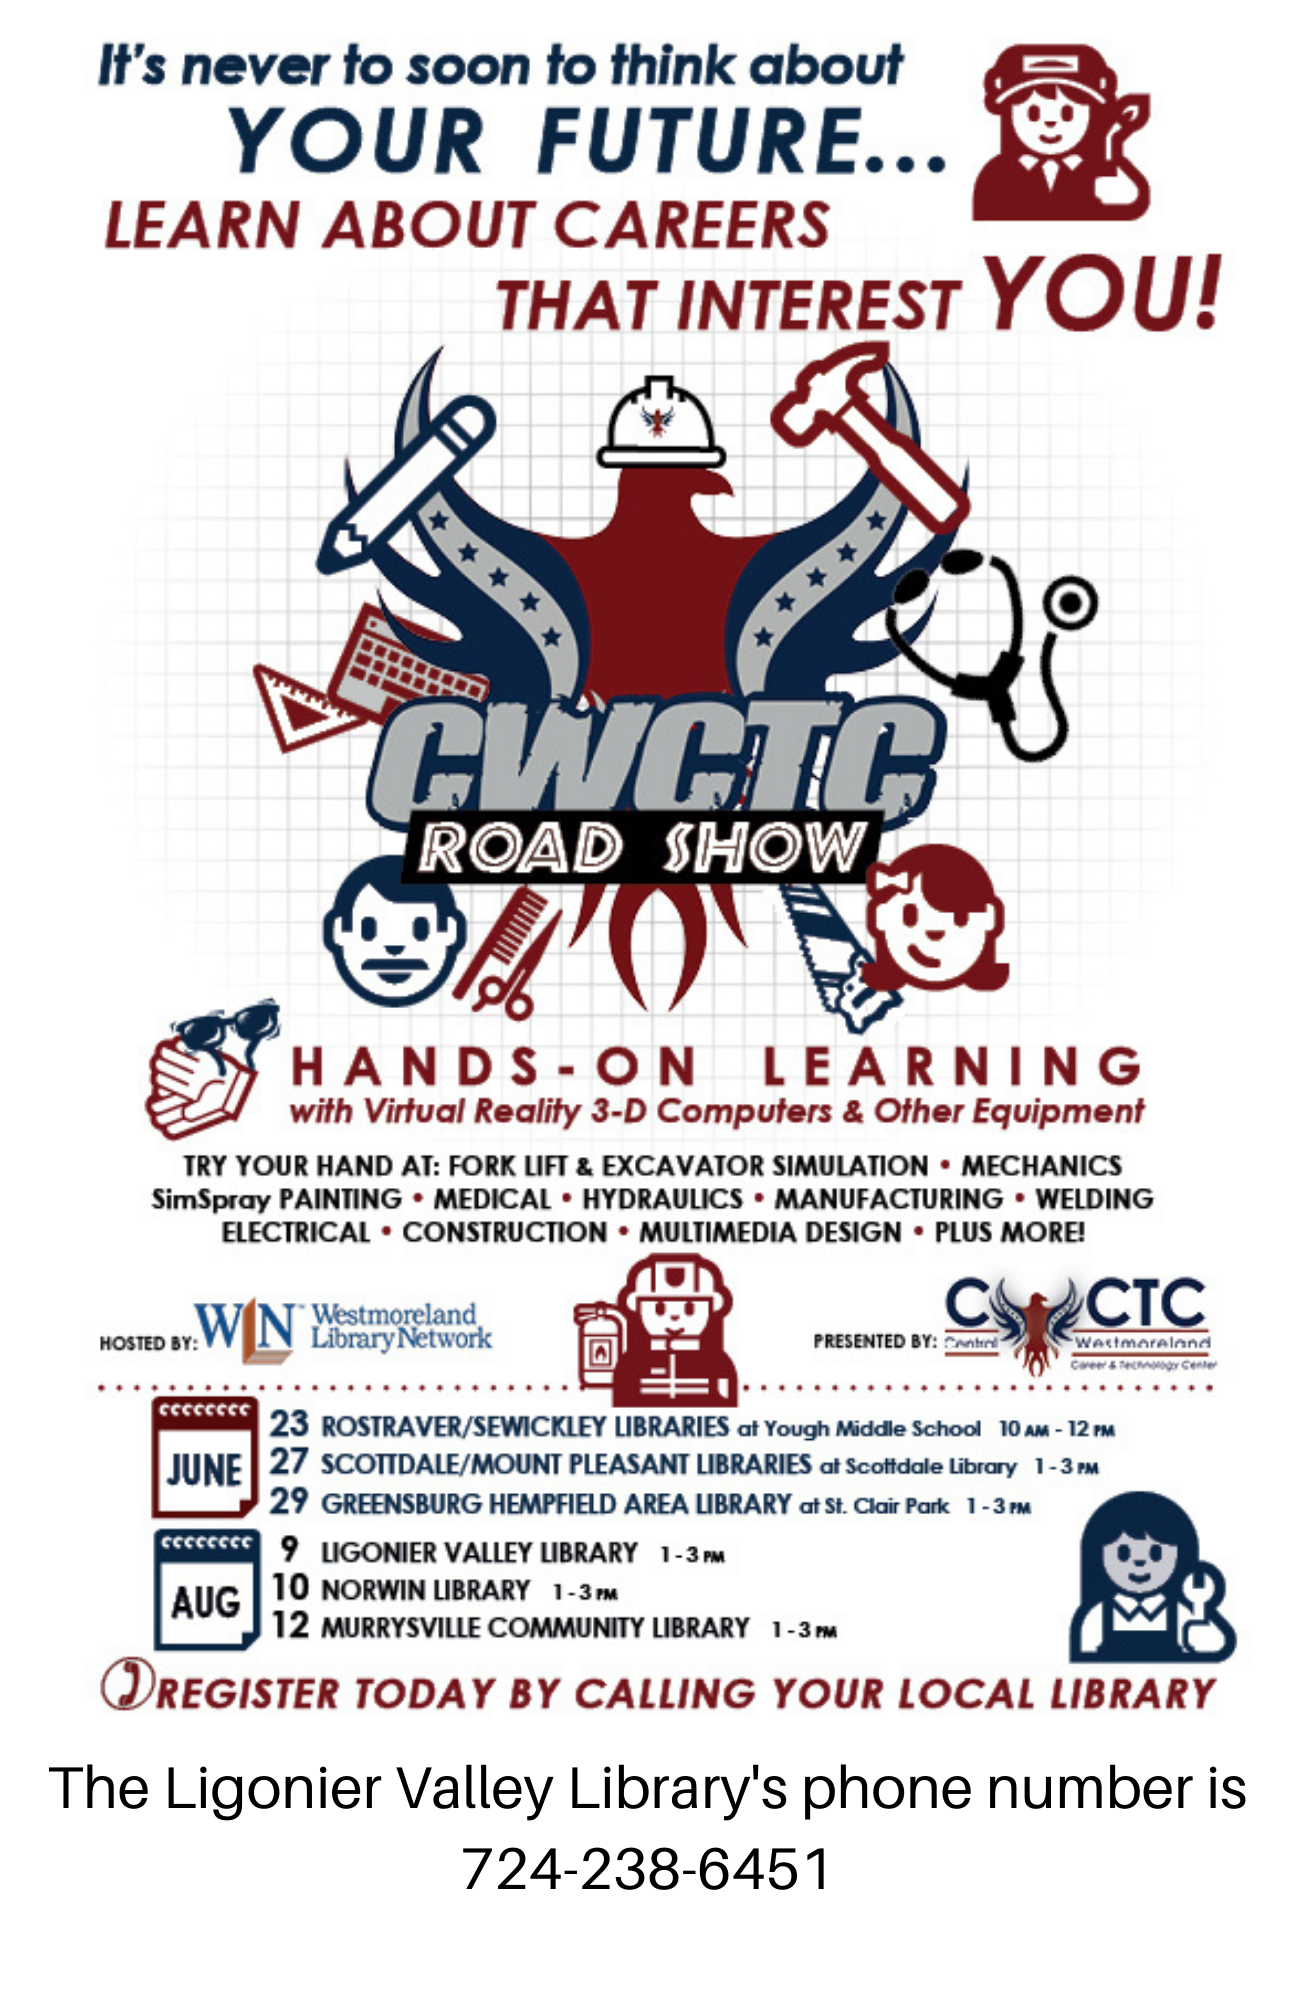 CWCTC Road Show--Learn About Careers!